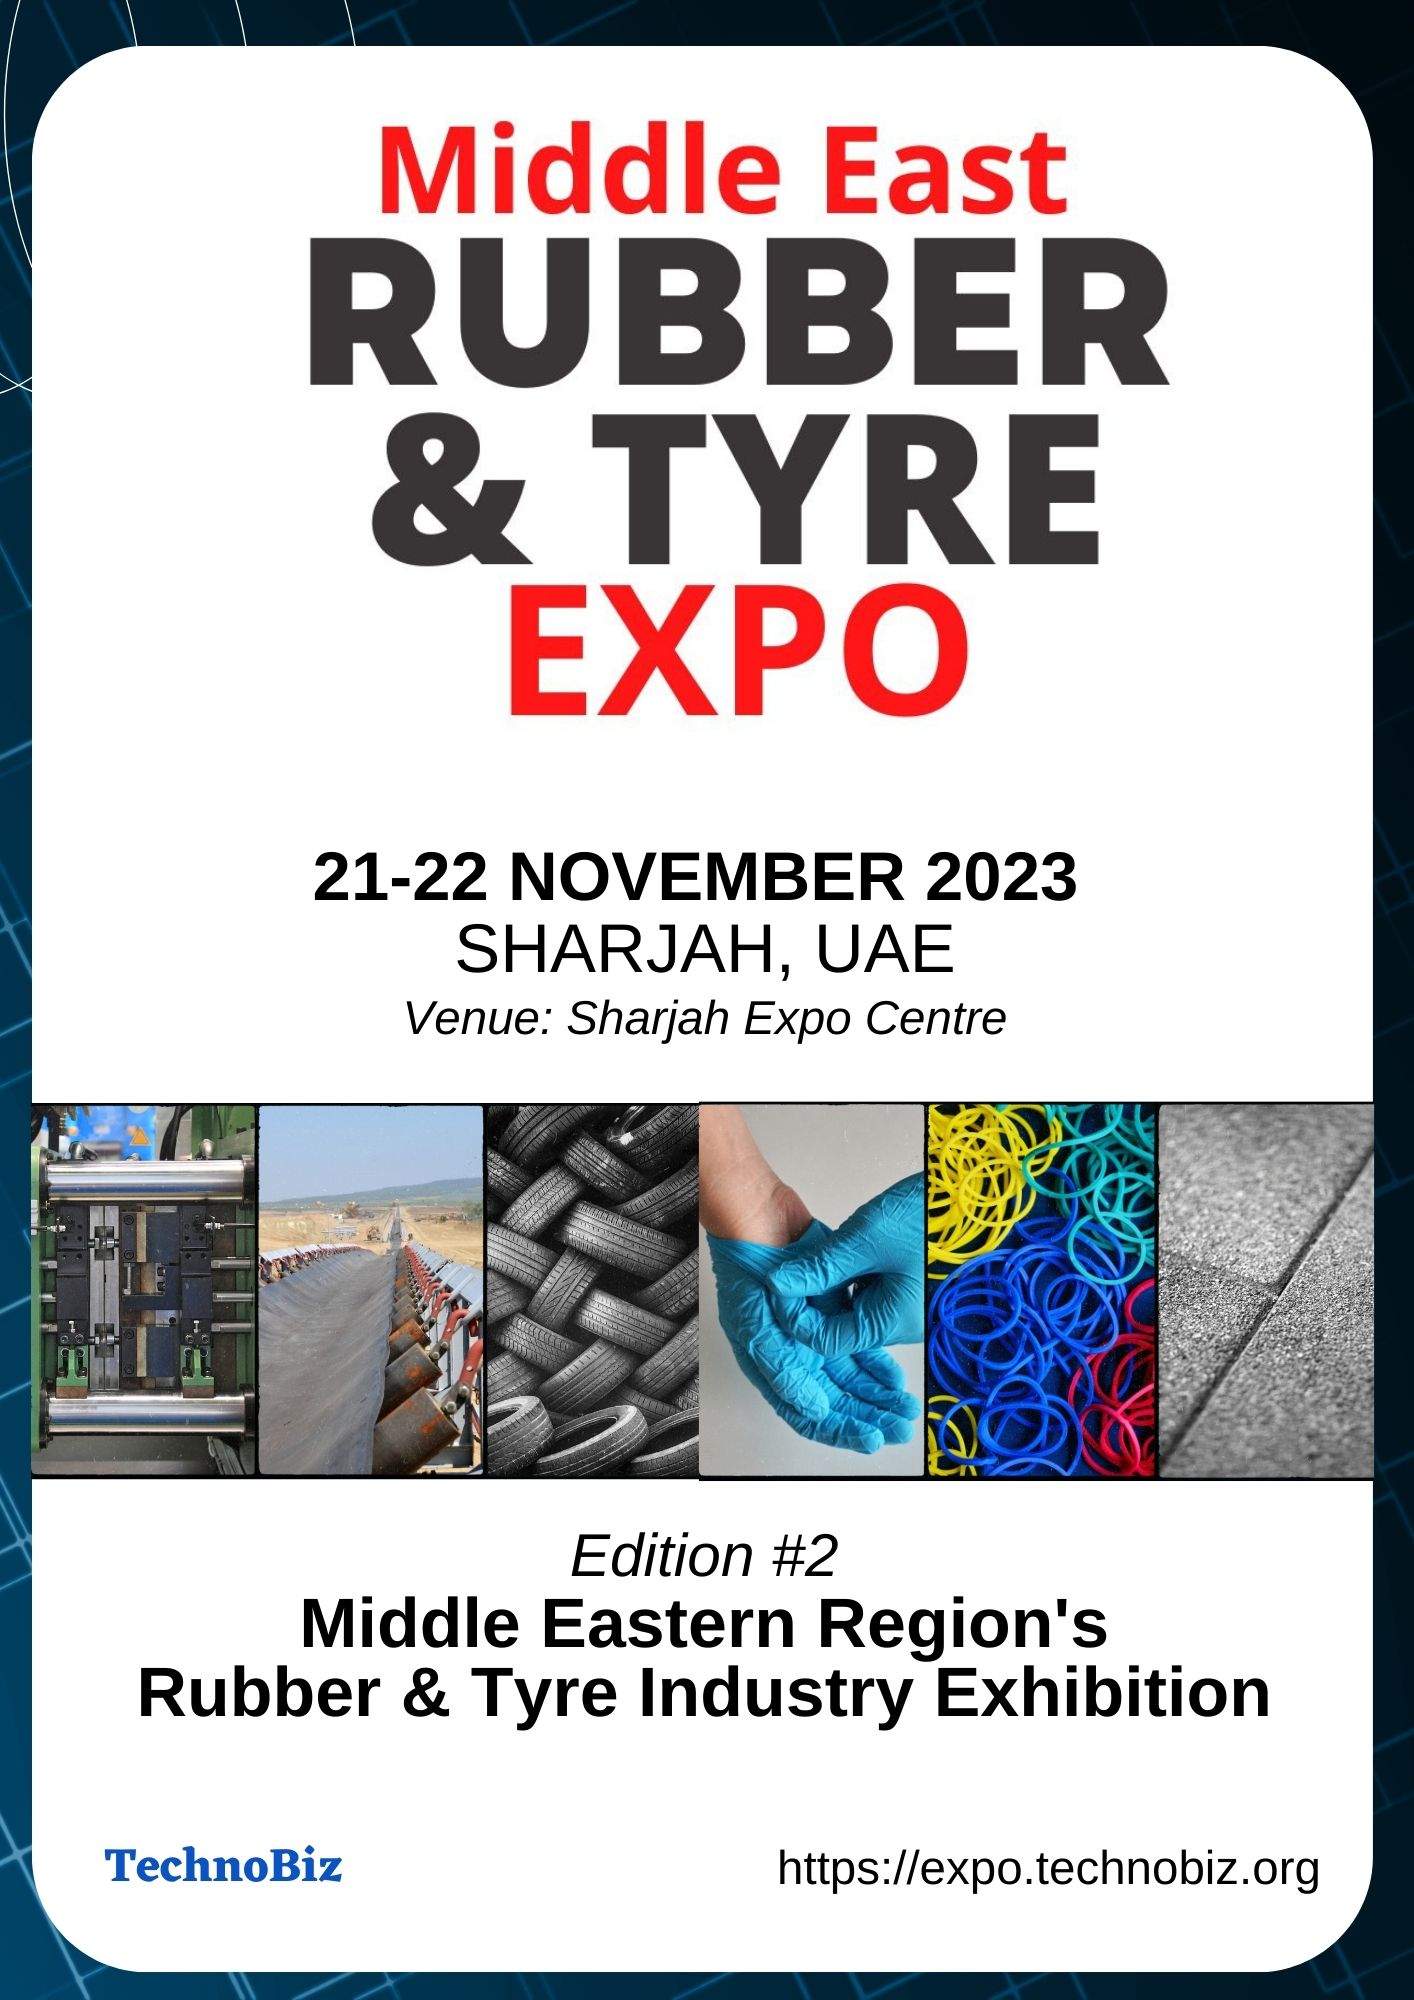 Middle East Rubber & Tyre Expo 2023